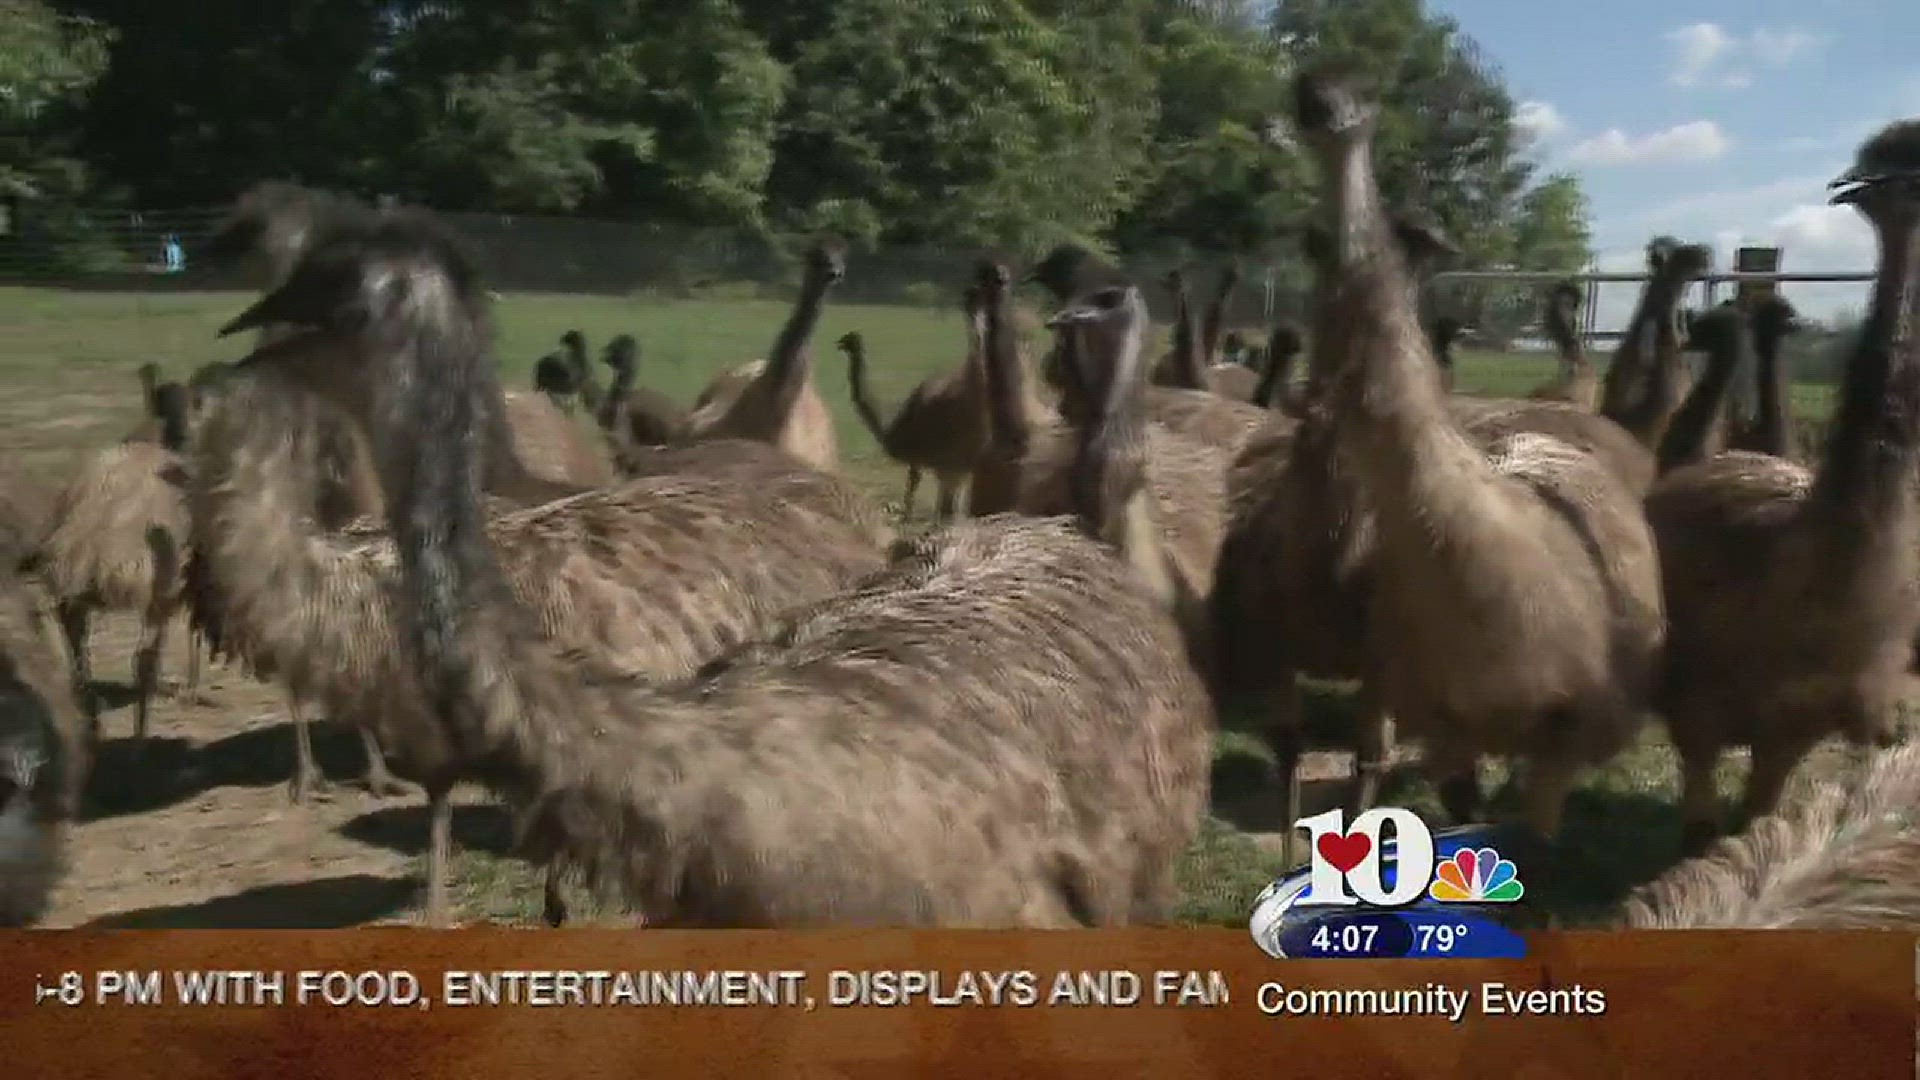 OCt. 2, 2015 Live at Five at 4
Dairy farmer gives up cows to raise flightless birds